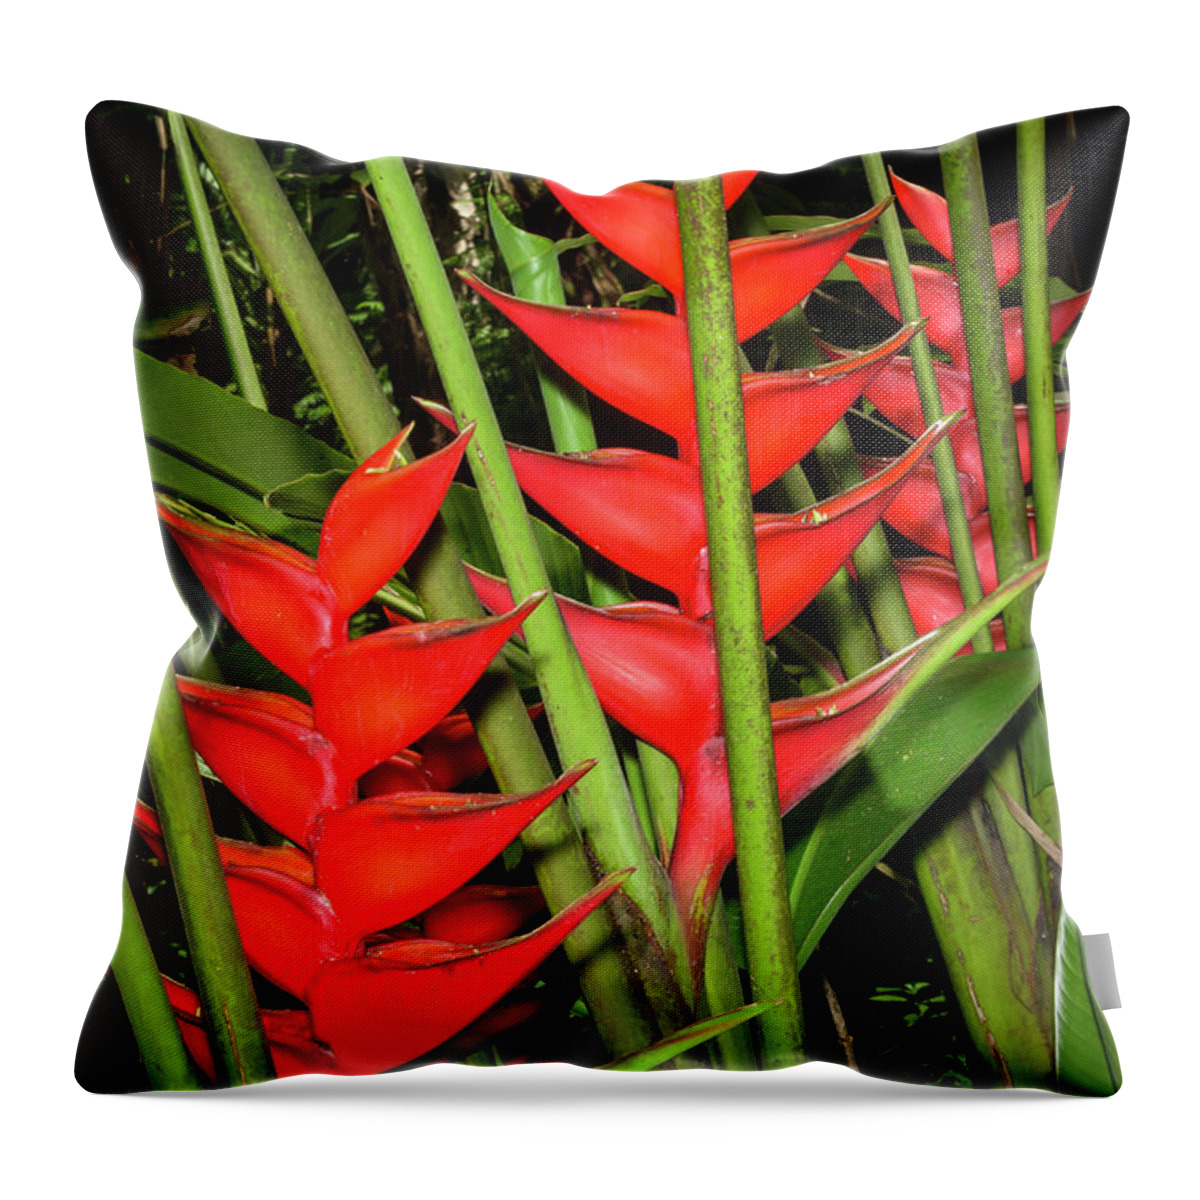 Flowers Throw Pillow featuring the photograph Heliconia by Jim Thompson